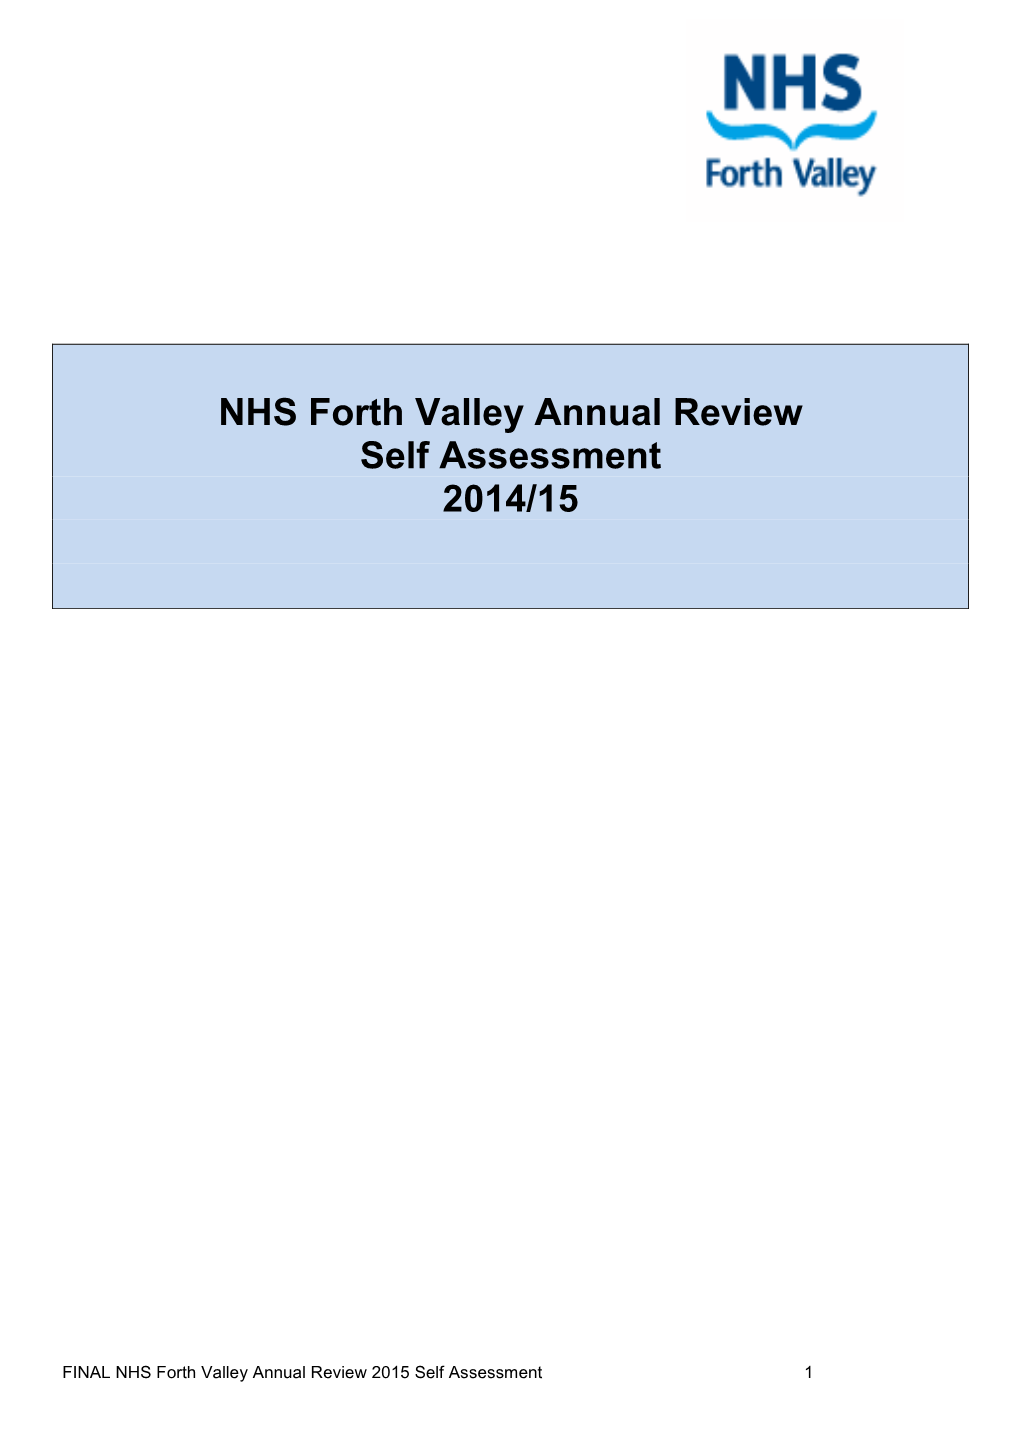 NHS Forth Valley Annual Review Self Assessment 2014/15